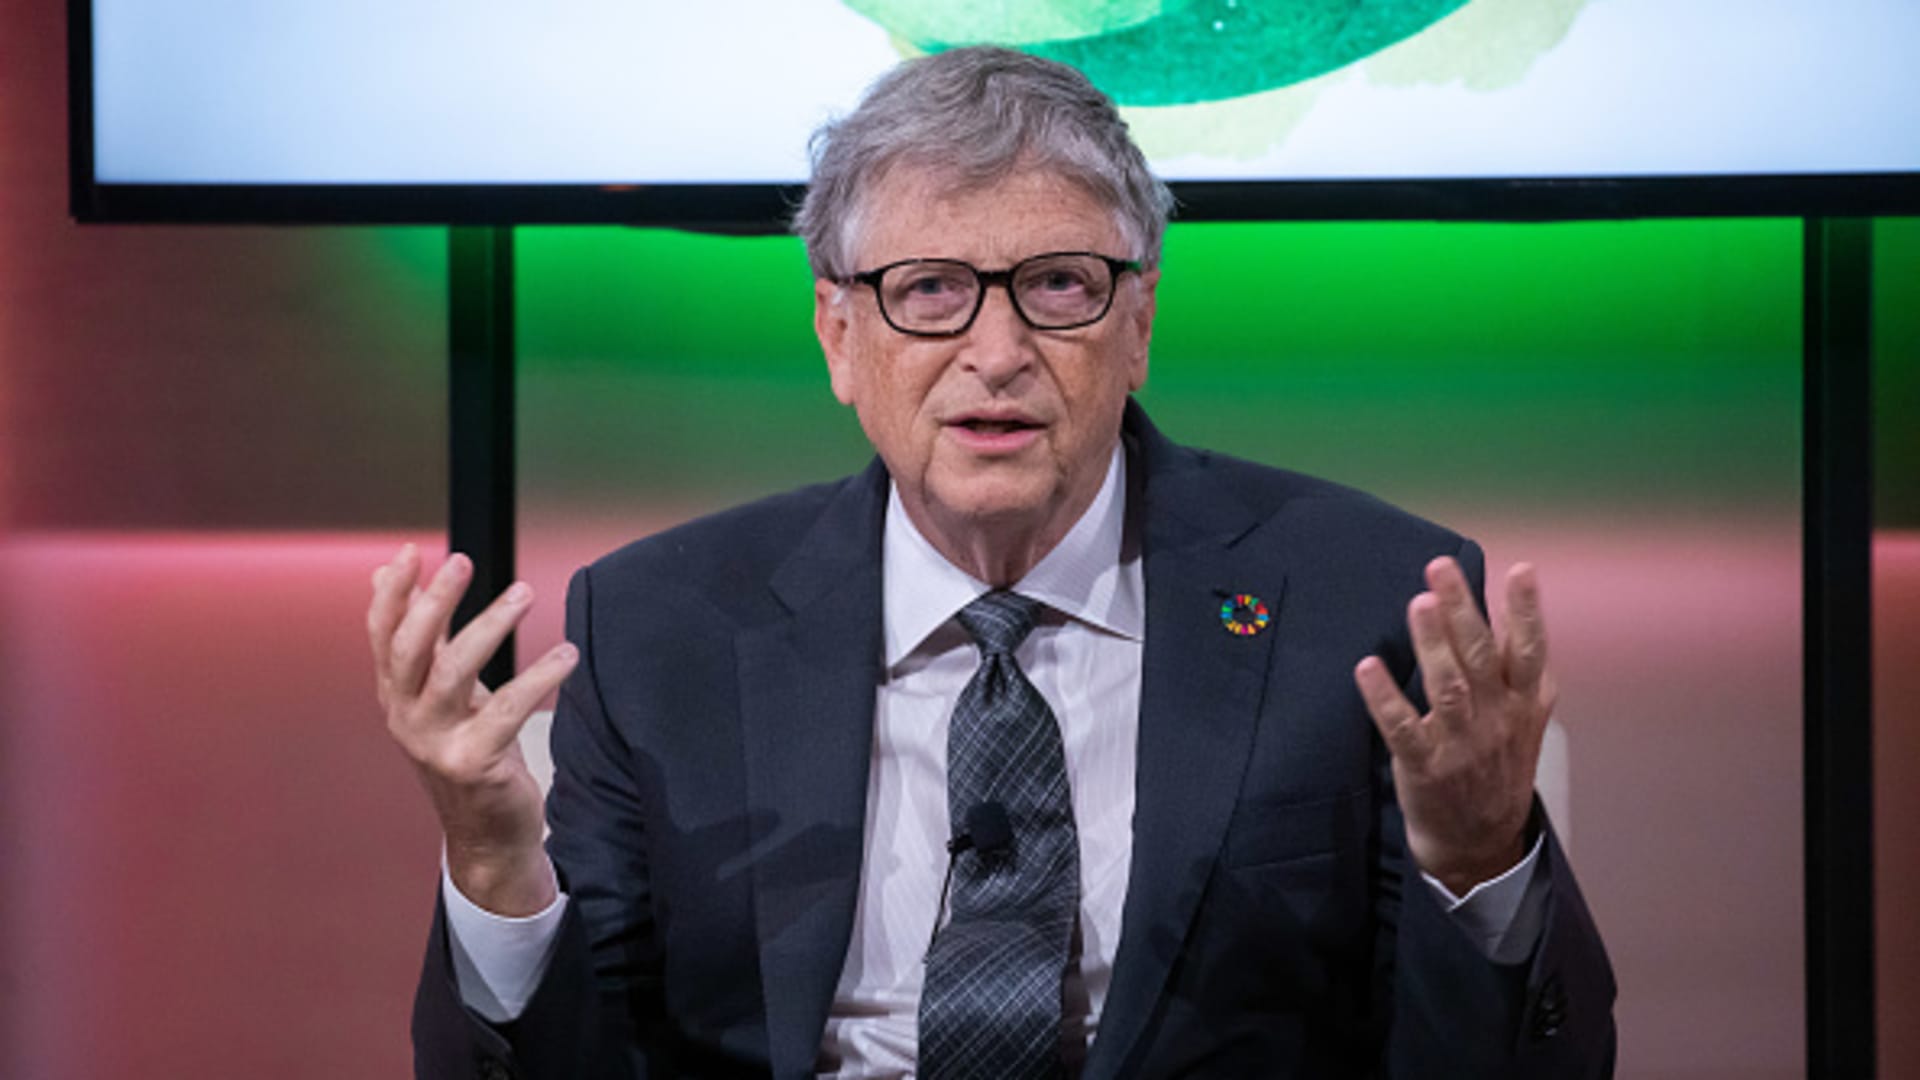 Bill Gates says rich countries must drive climate change innovation